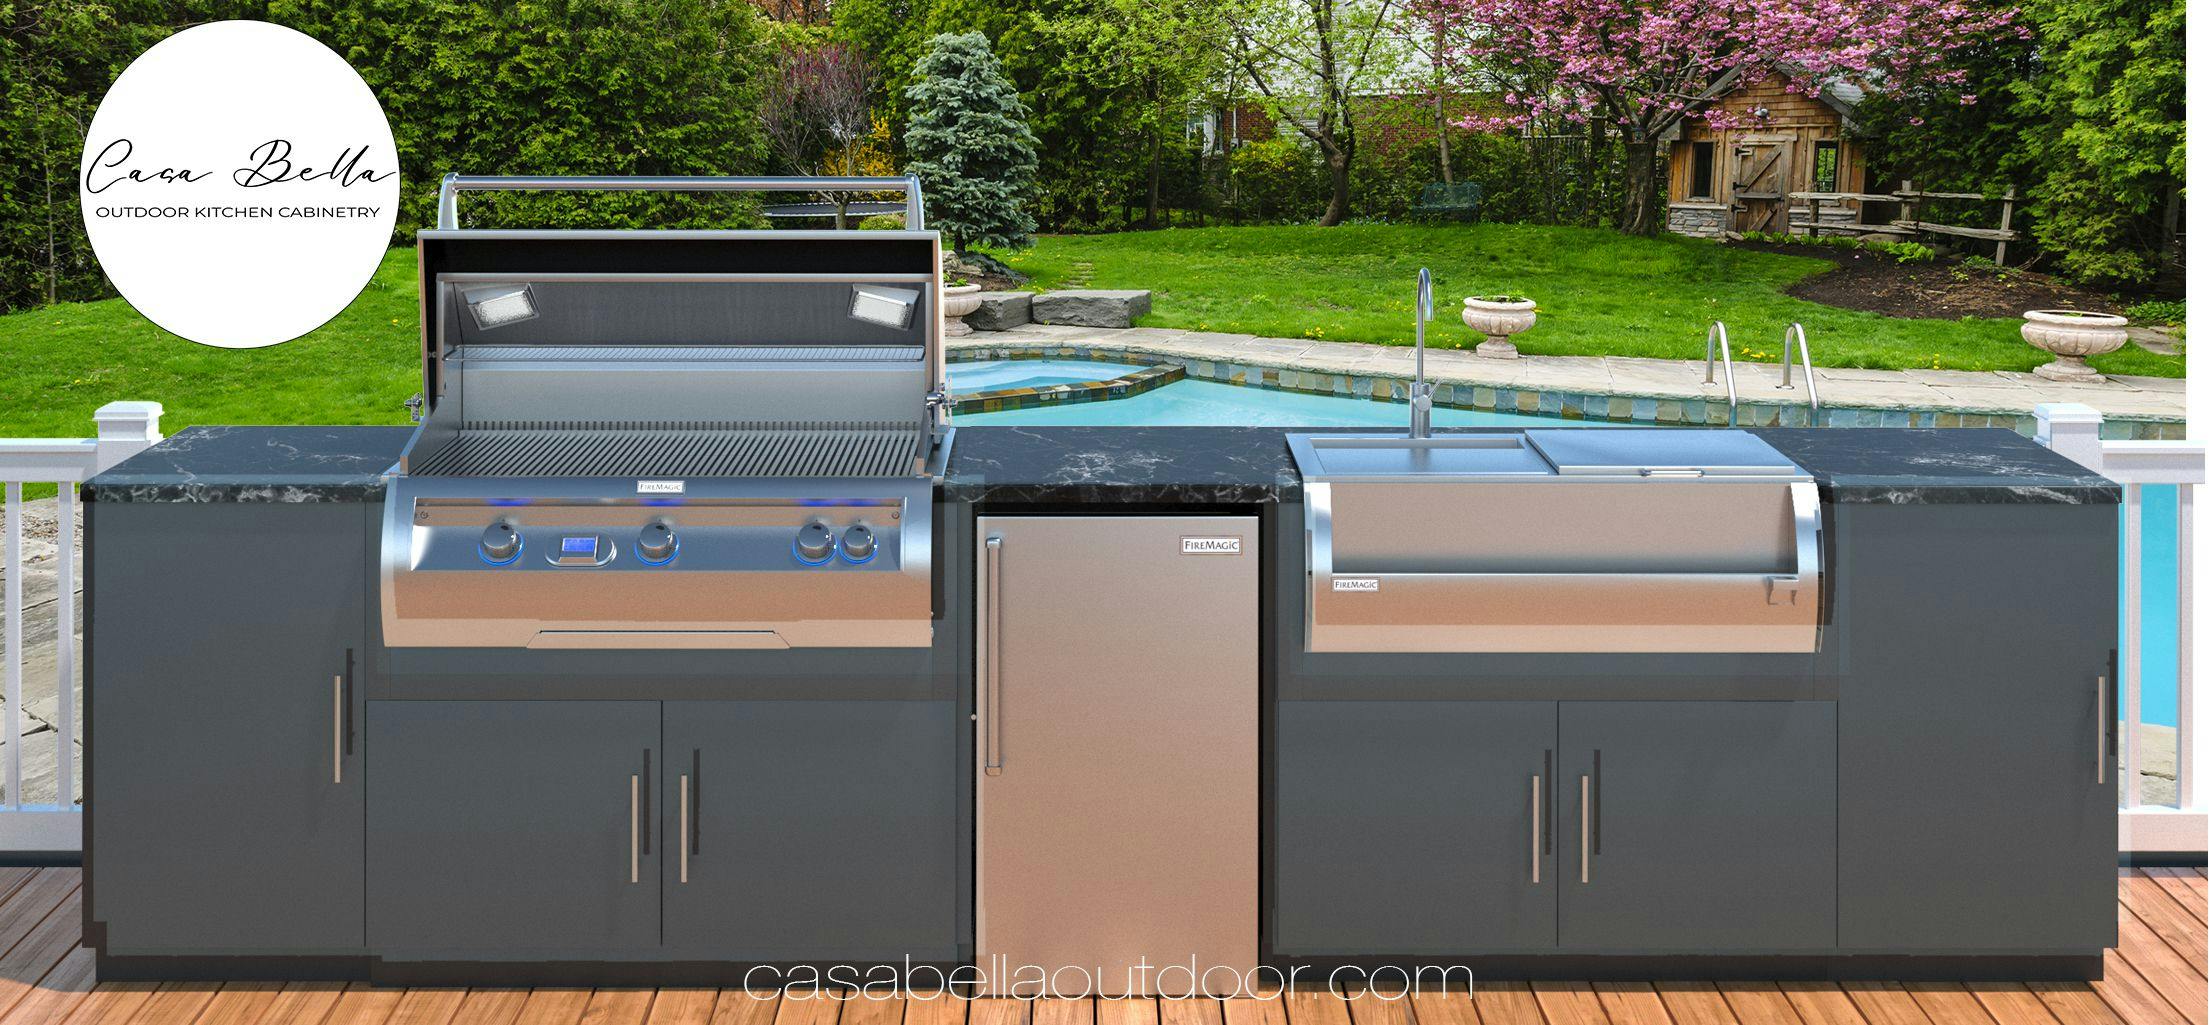 Choosing the Right Appliances for Your Outdoor Kitchen